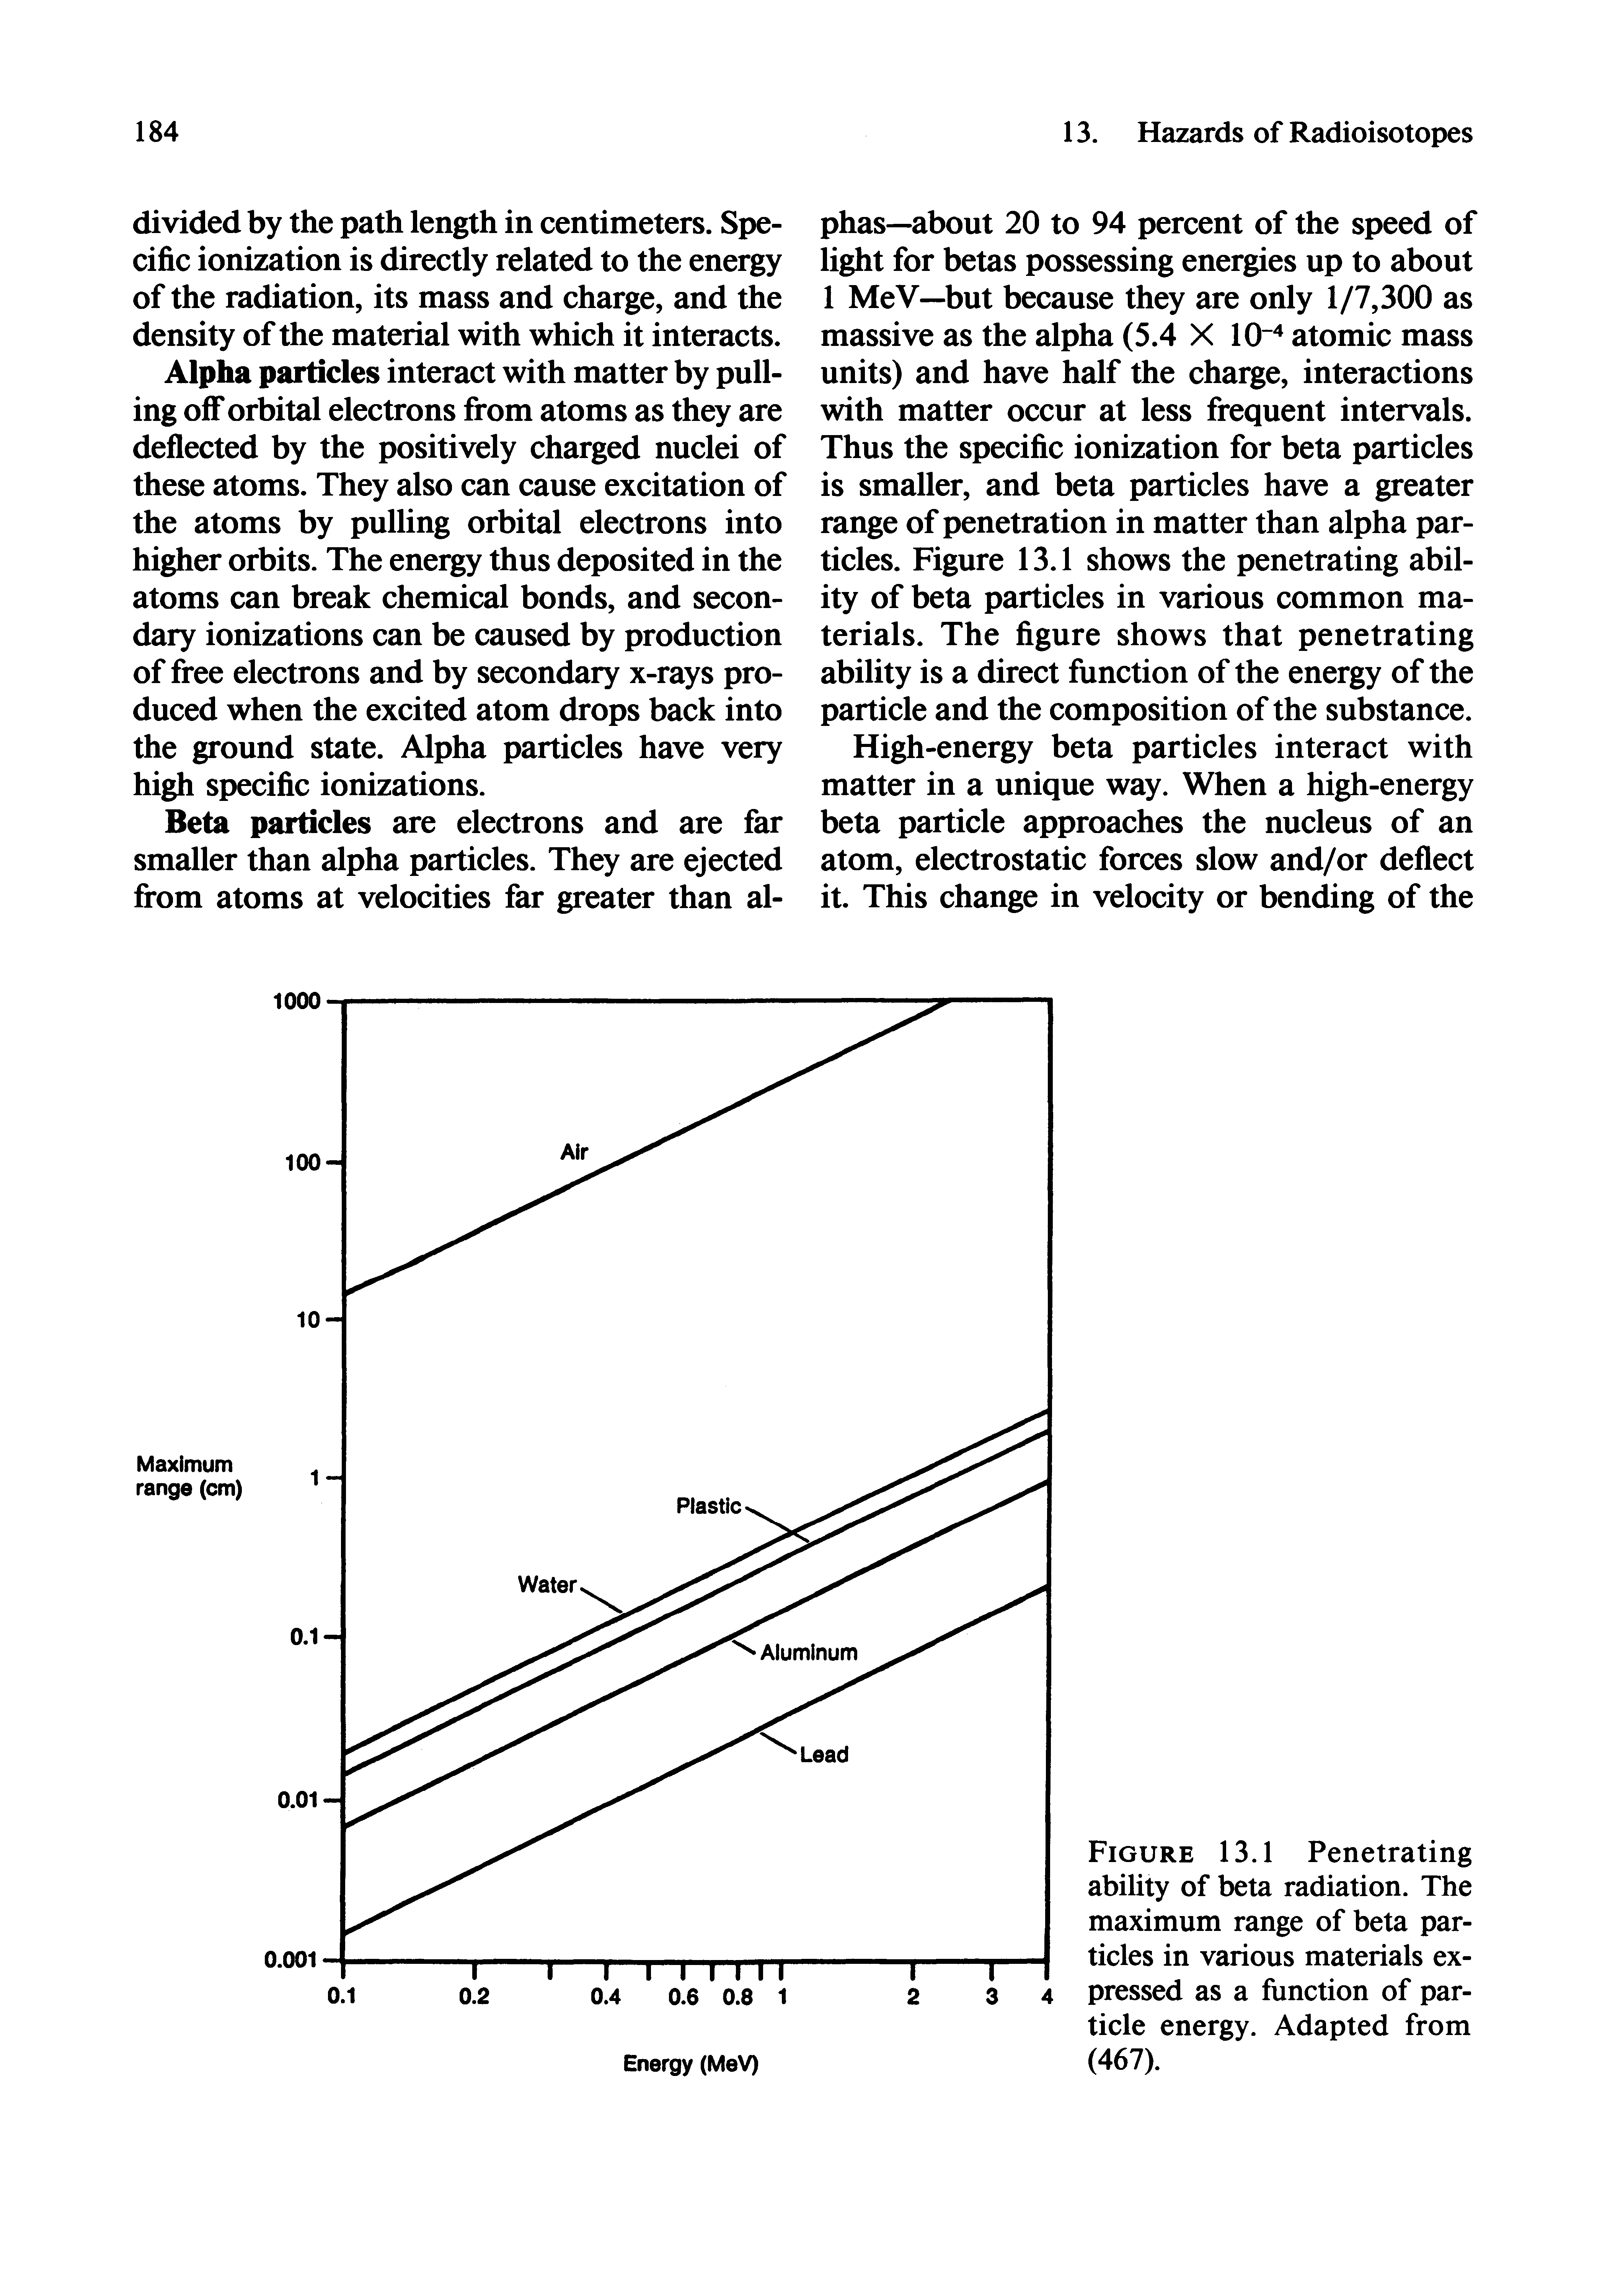 Figure 13.1 Penetrating ability of beta radiation. The maximum range of beta particles in various materials expressed as a function of particle energy. Adapted from (467).